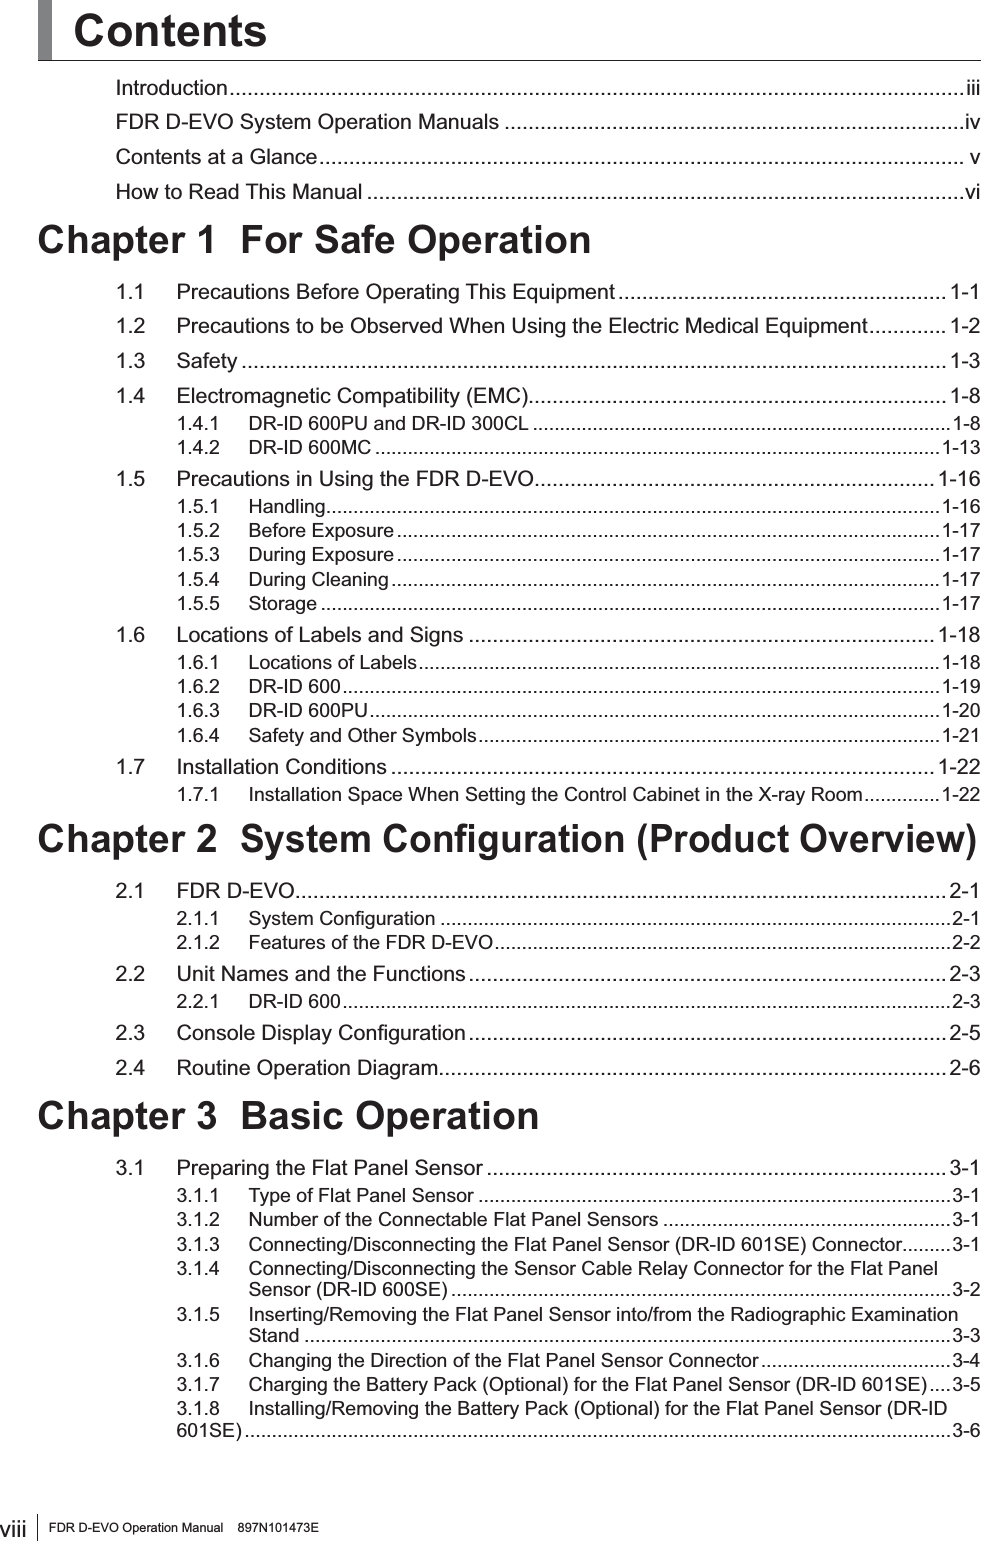 viii FDR D-EVO Operation Manual    897N101473EContentsIntroduction ...........................................................................................................................iiiFDR D-EVO System Operation Manuals .............................................................................ivContents at a Glance ............................................................................................................ vHow to Read This Manual ....................................................................................................viChapter 1 For Safe Operation1.1 Precautions Before Operating This Equipment ....................................................... 1-11.2 Precautions to be Observed When Using the Electric Medical Equipment ............. 1-21.3 Safety ...................................................................................................................... 1-31.4 Electromagnetic Compatibility (EMC) ...................................................................... 1-81.4.1 DR-ID 600PU and DR-ID 300CL .............................................................................1-81.4.2 DR-ID 600MC ........................................................................................................1-131.5 Precautions in Using the FDR D-EVO ................................................................... 1-161.5.1 Handling .................................................................................................................1-161.5.2 Before Exposure ....................................................................................................1-171.5.3 During Exposure ....................................................................................................1-171.5.4 During Cleaning .....................................................................................................1-171.5.5 Storage ..................................................................................................................1-171.6 Locations of Labels and Signs .............................................................................. 1-181.6.1 Locations of Labels ................................................................................................1-181.6.2 DR-ID 600 ..............................................................................................................1-191.6.3 DR-ID 600PU .........................................................................................................1-201.6.4 Safety and Other Symbols .....................................................................................1-211.7 Installation Conditions ...........................................................................................1-221.7.1 Installation Space When Setting the Control Cabinet in the X-ray Room ..............1-22Chapter 26\VWHP&amp;RQ¿JXUDWLRQ3URGXFW2YHUYLHZ2.1 FDR D-EVO ............................................................................................................. 2-1 6\VWHP&amp;RQ¿JXUDWLRQ ..............................................................................................2-12.1.2 Features of the FDR D-EVO ....................................................................................2-22.2 Unit Names and the Functions ................................................................................ 2-32.2.1 DR-ID 600 ................................................................................................................2-3 &amp;RQVROH&apos;LVSOD\&amp;RQ¿JXUDWLRQ ................................................................................ 2-52.4 Routine Operation Diagram..................................................................................... 2-6Chapter 3 Basic Operation3.1 Preparing the Flat Panel Sensor .............................................................................3-13.1.1 Type of Flat Panel Sensor .......................................................................................3-13.1.2 Number of the Connectable Flat Panel Sensors .....................................................3-13.1.3 Connecting/Disconnecting the Flat Panel Sensor (DR-ID 601SE) Connector.........3-13.1.4  Connecting/Disconnecting the Sensor Cable Relay Connector for the Flat Panel Sensor (DR-ID 600SE) ............................................................................................3-23.1.5  Inserting/Removing the Flat Panel Sensor into/from the Radiographic Examination Stand .......................................................................................................................3-33.1.6 Changing the Direction of the Flat Panel Sensor Connector ...................................3-43.1.7 Charging the Battery Pack (Optional) for the Flat Panel Sensor (DR-ID 601SE) ....3-53.1.8 Installing/Removing the Battery Pack (Optional) for the Flat Panel Sensor (DR-ID 601SE) ..................................................................................................................................3-6